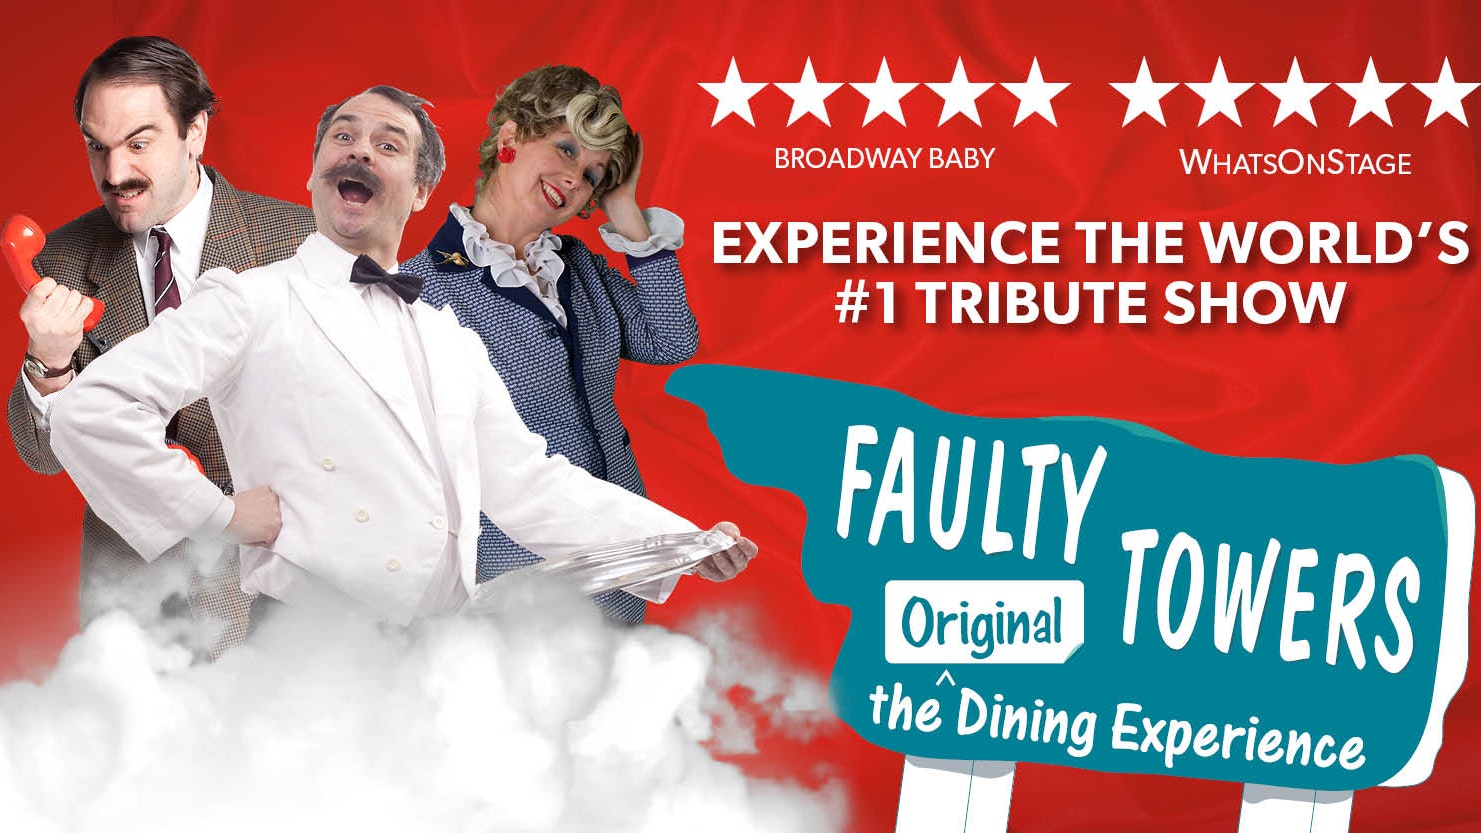 🚨 SOLD OUT! Faulty Towers The Dining Experience ⭐️⭐️⭐️⭐️⭐️